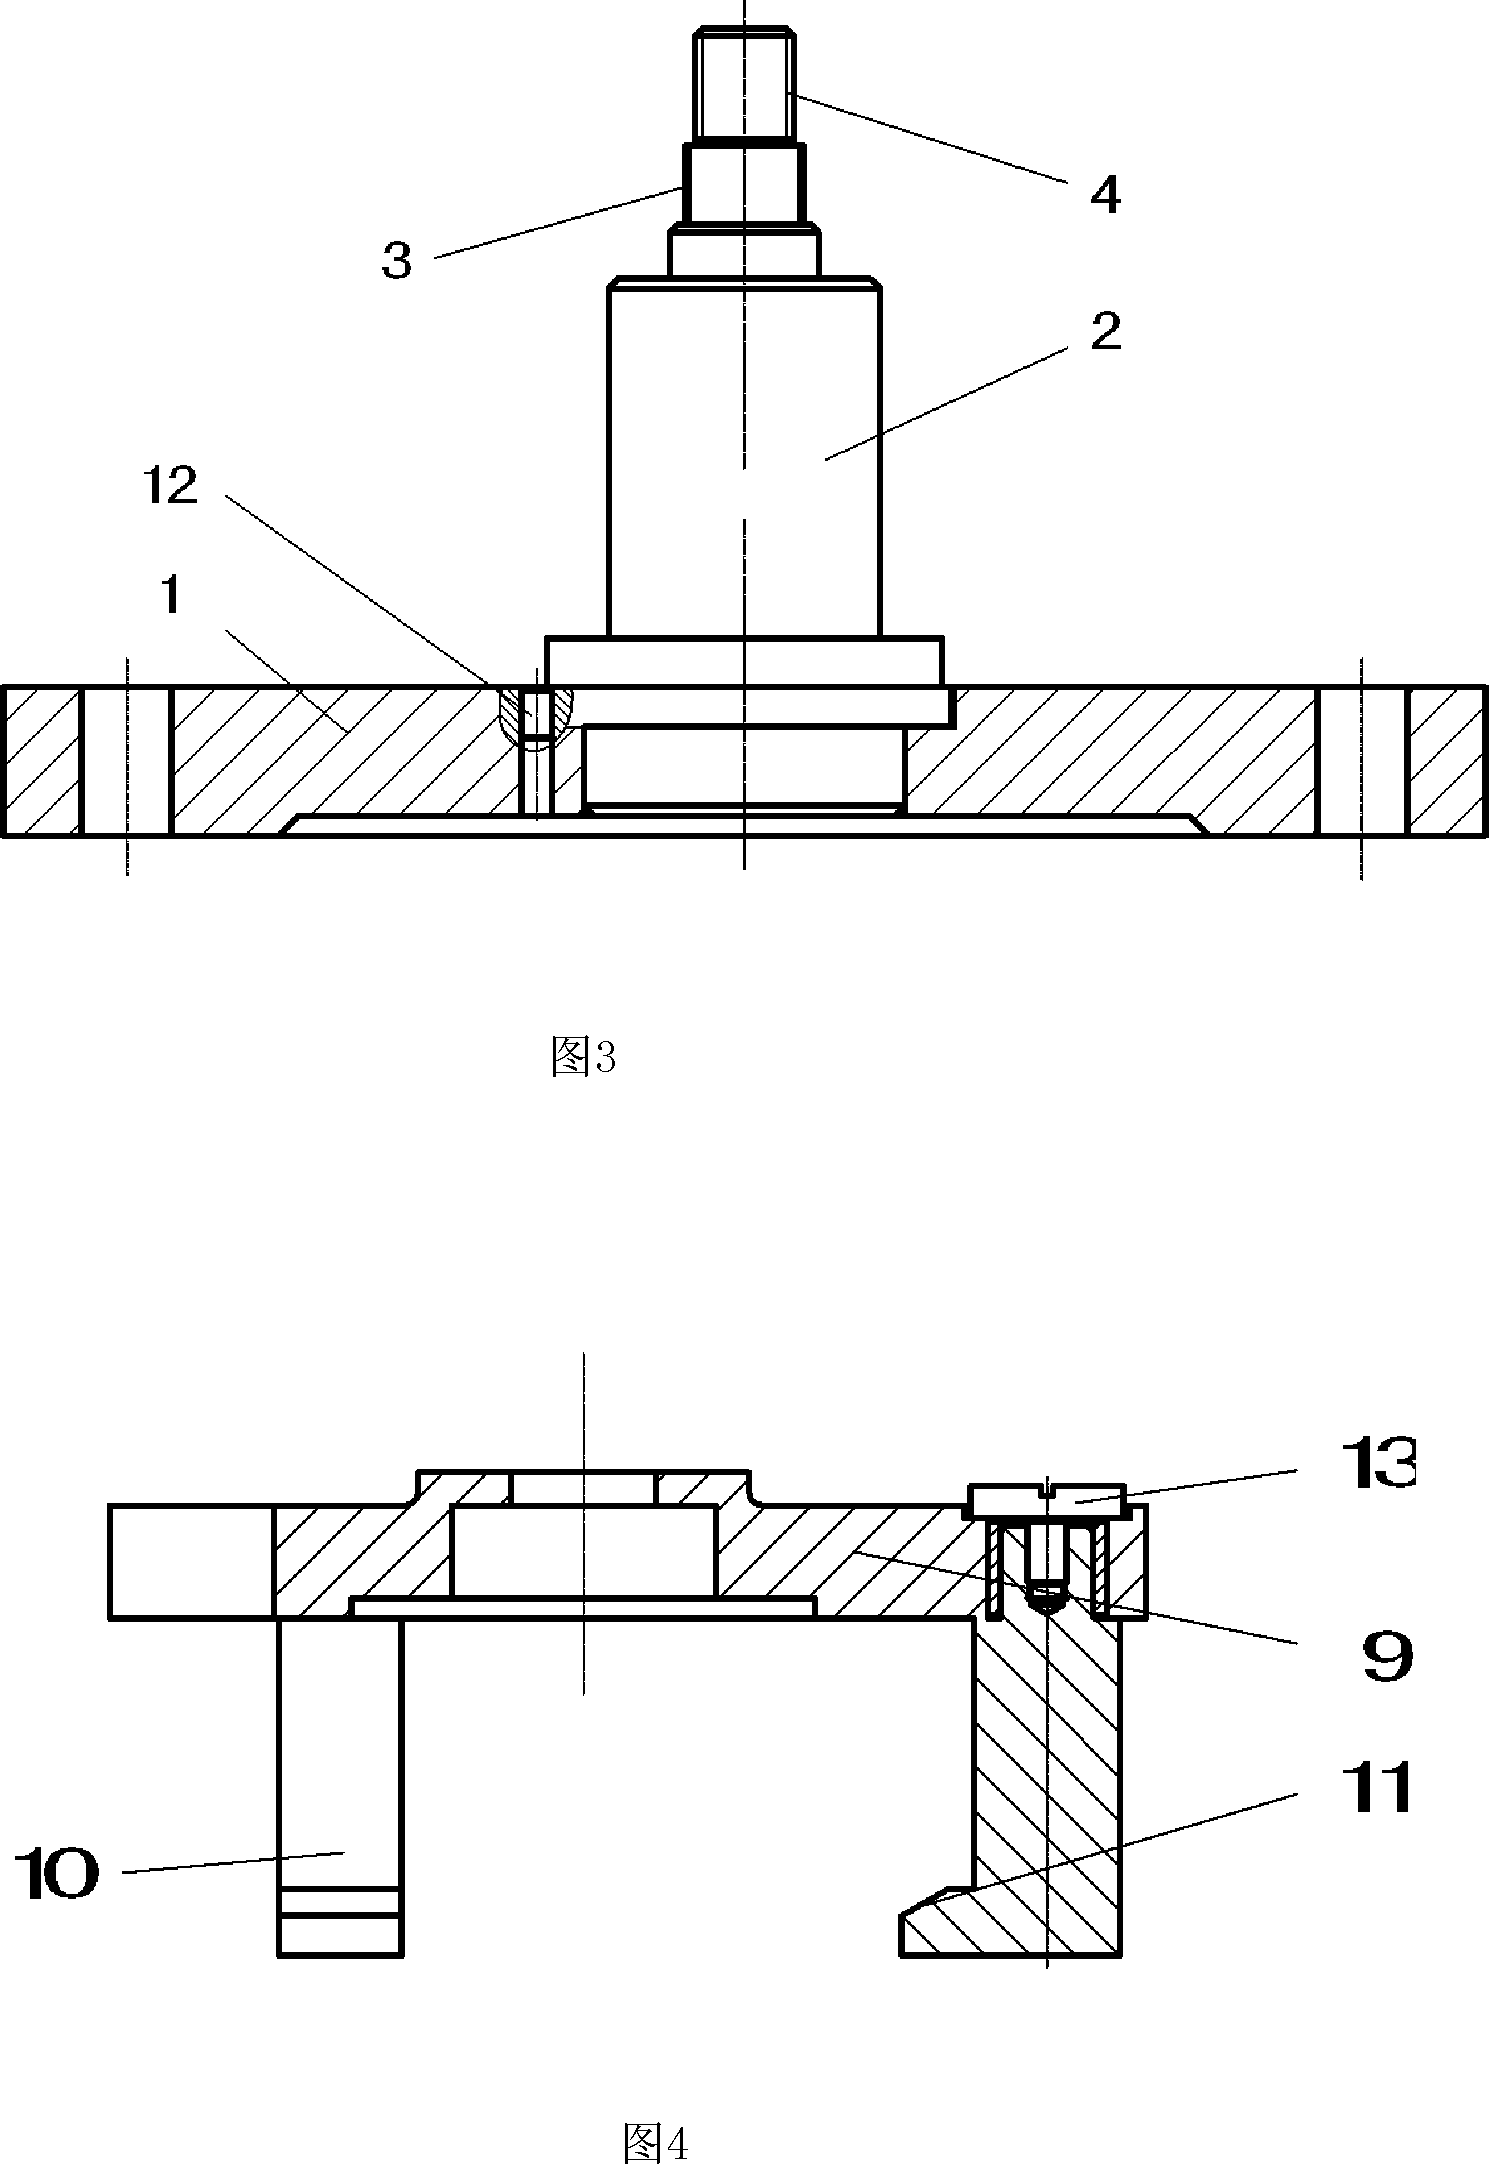 Method for measuring single row conical bearing connection in series matched pair inter space